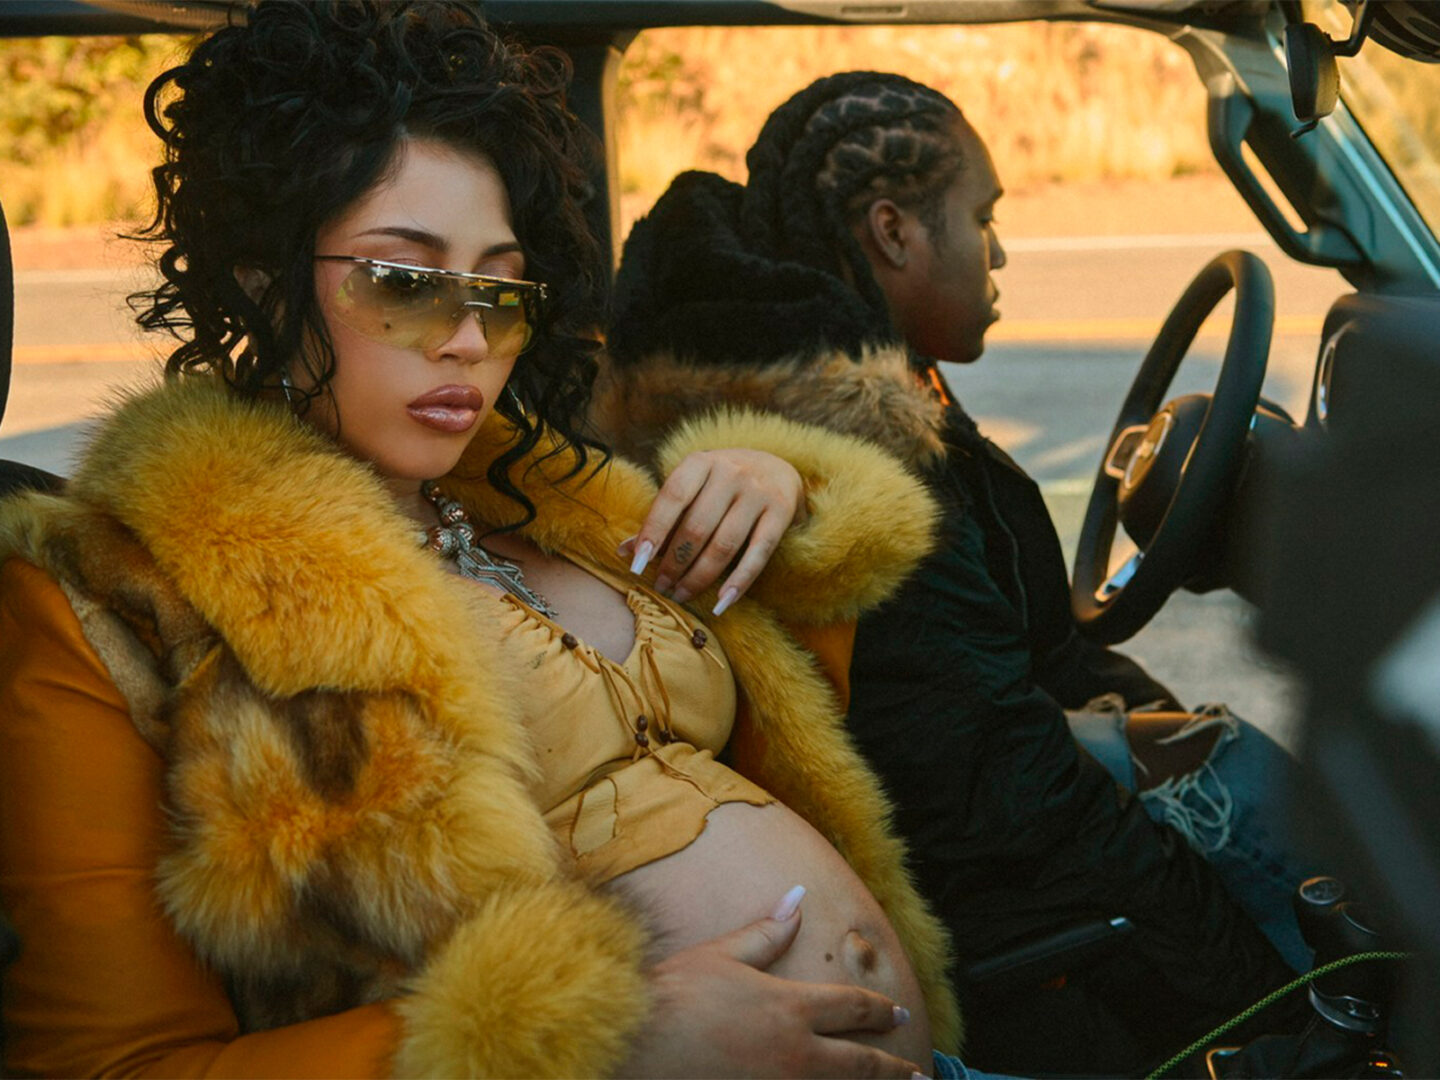 Kali Uchis and Don Toliver are expecting their first child